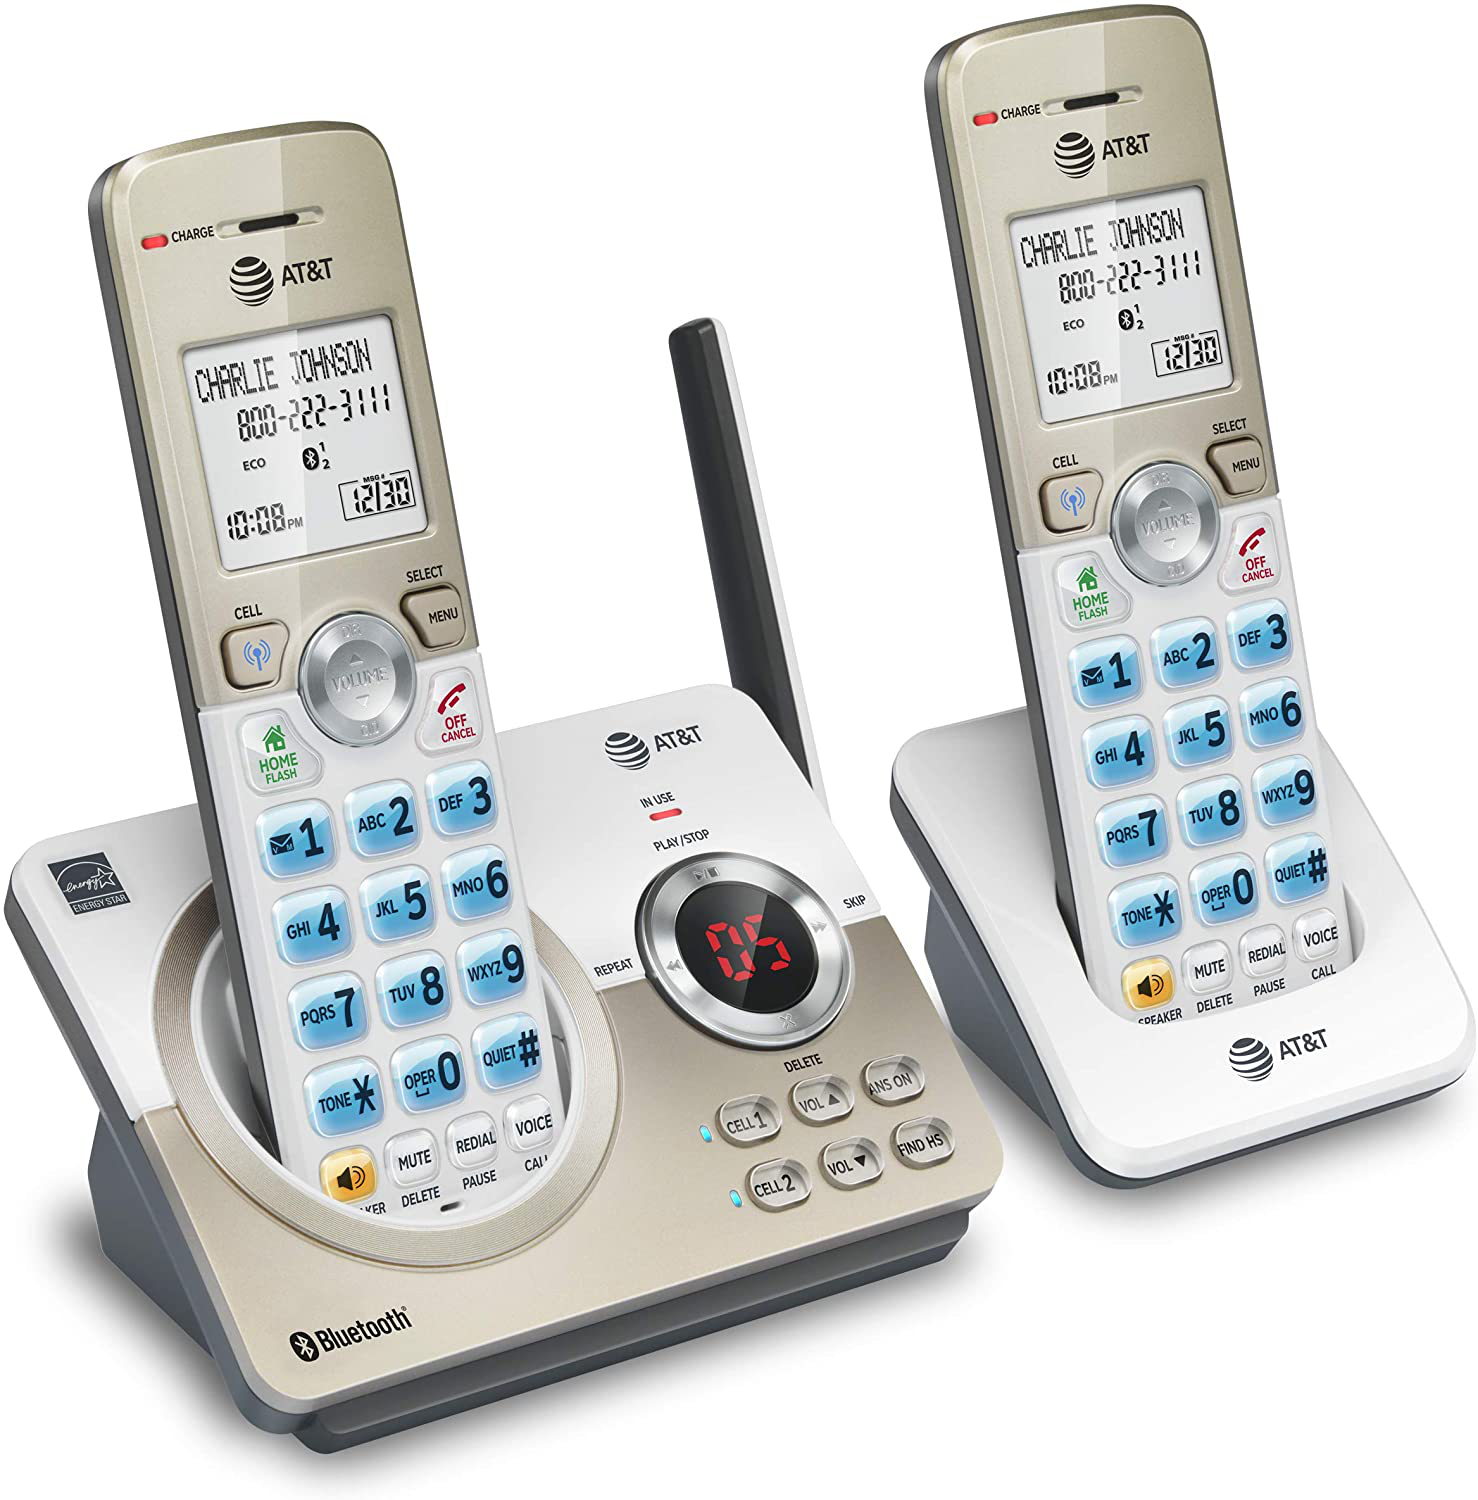 AT&T DL72219 DECT 6.0 Cordless Phone for Home with Connect to Cell, Call Blocking, 1.8" Backlit Screen, Big Buttons, intercom, and Unsurpassed Range Set